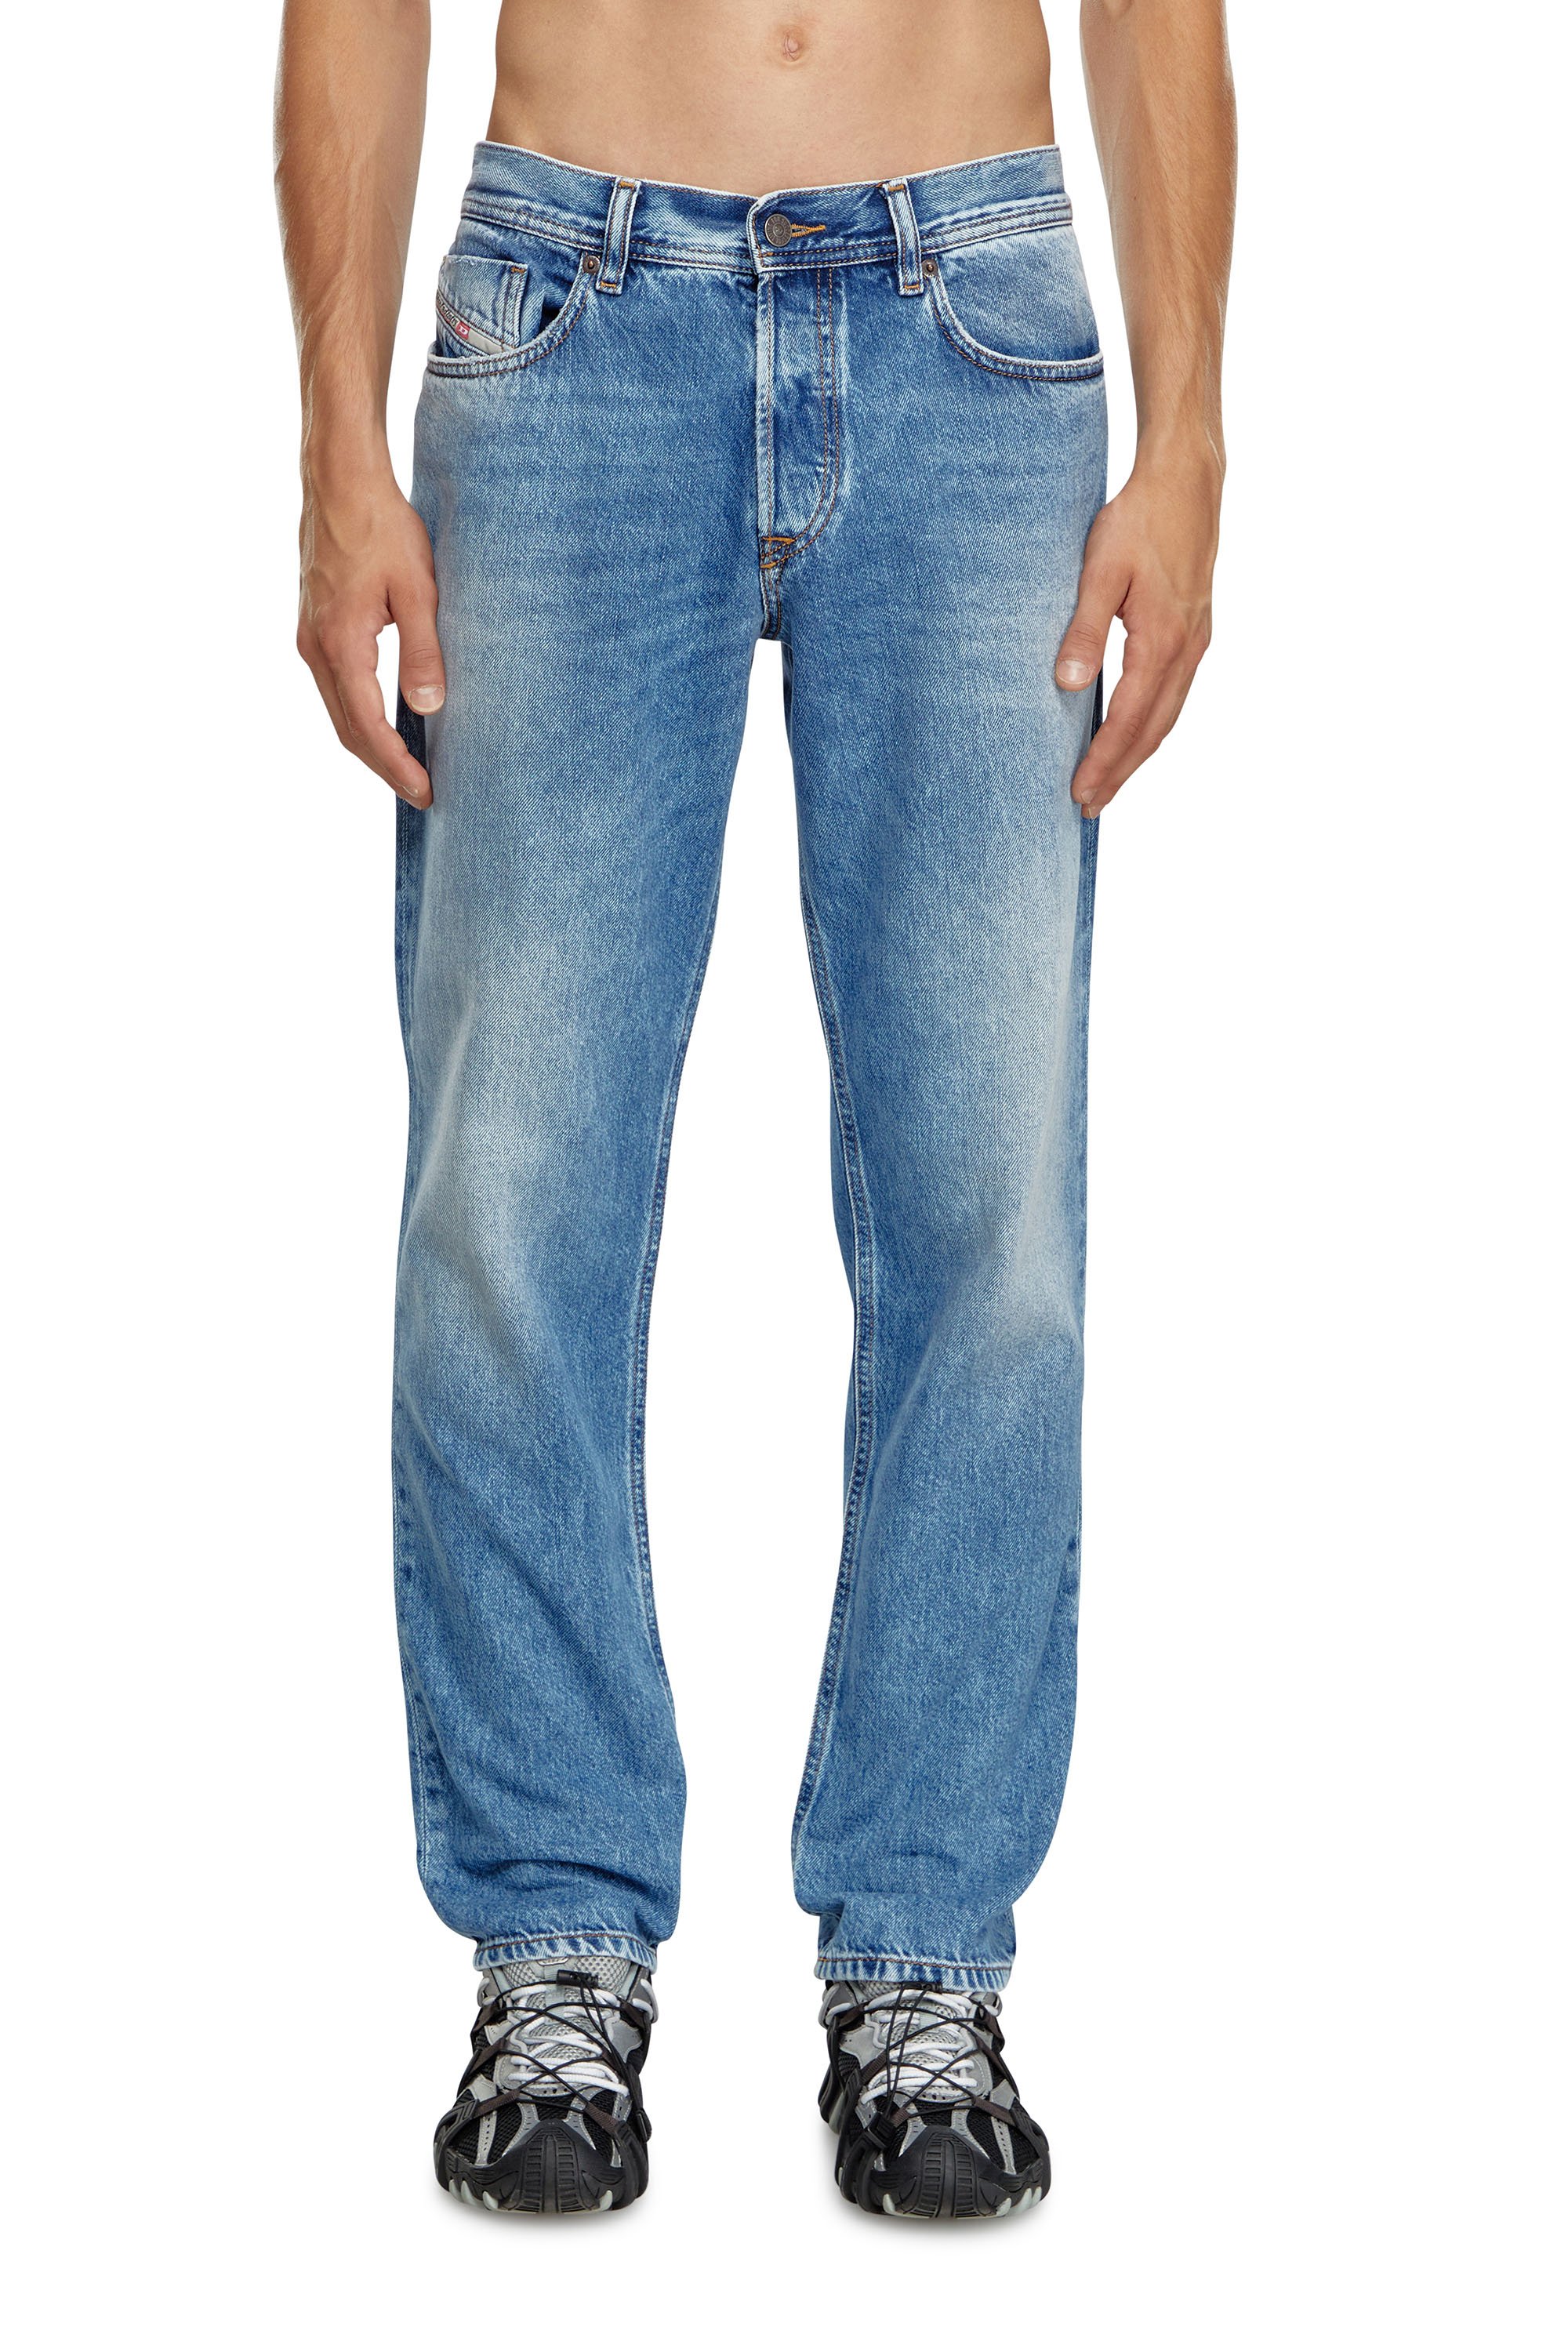 Diesel - Tapered Jeans 2023 D-Finitive 09H95, Hombre Tapered Jeans - 2023 D-Finitive in Azul marino - Image 2